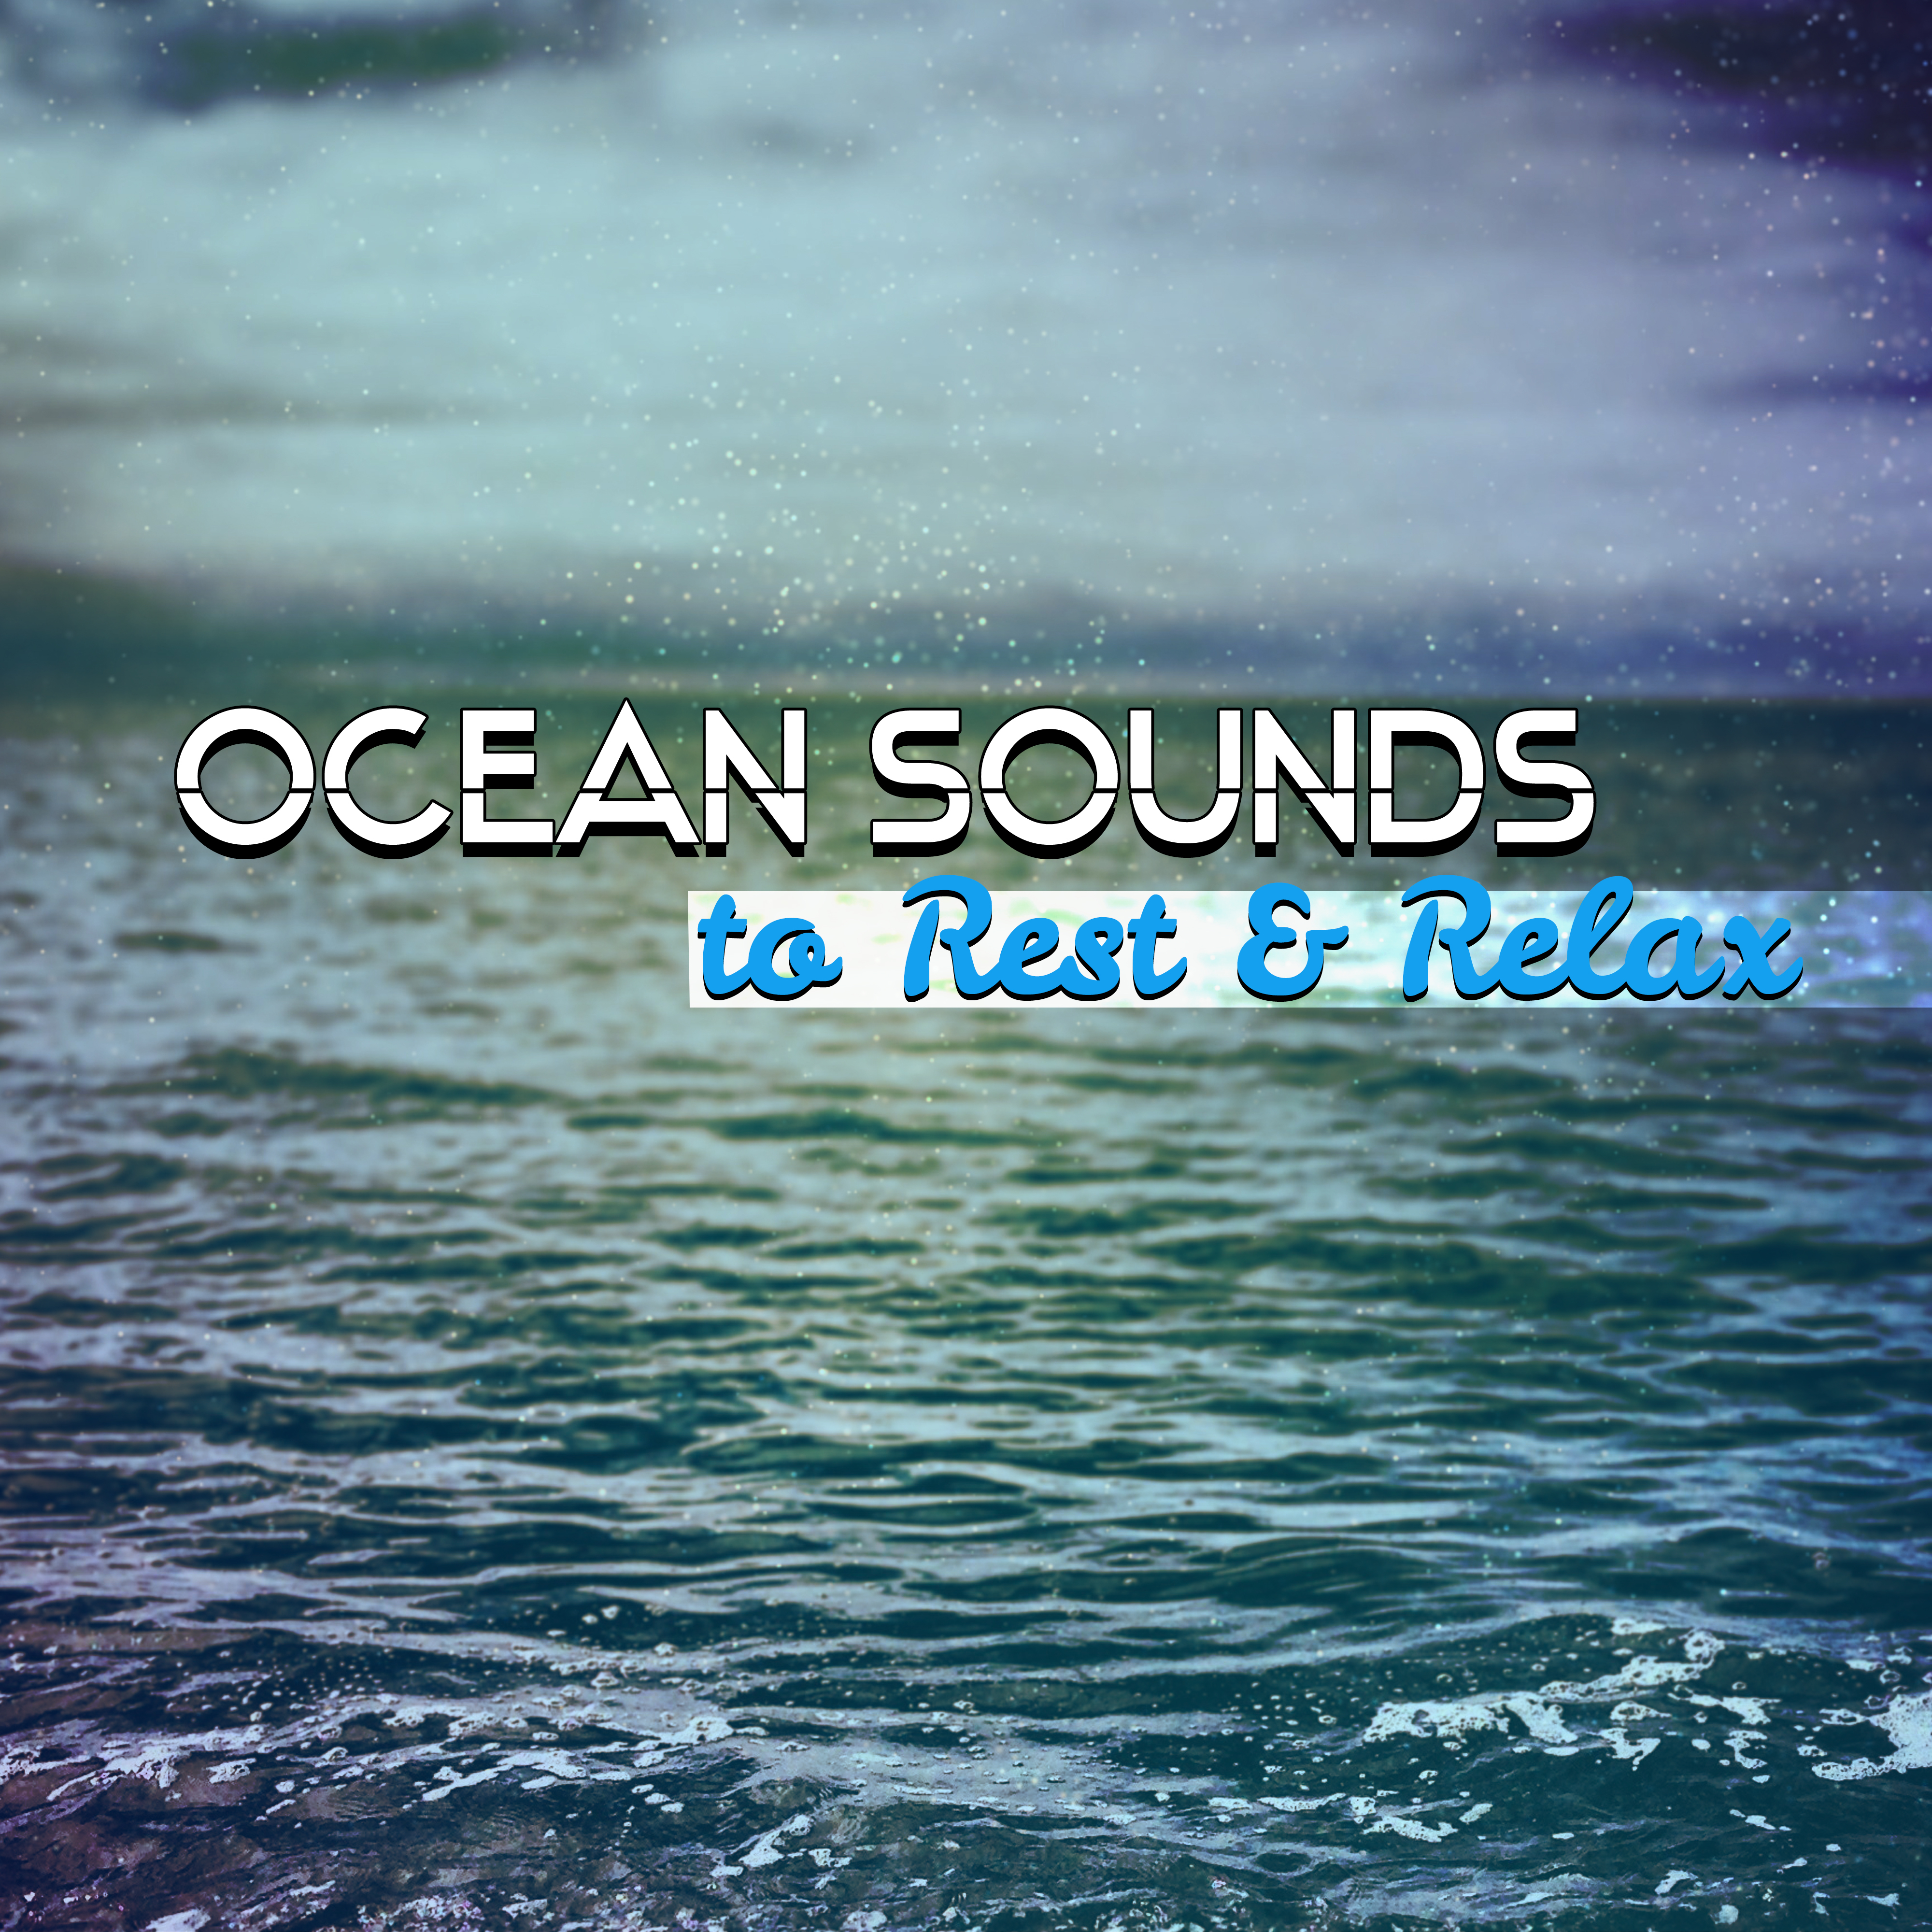 Ocean Sounds to Rest & Relax – Soothing Nature Waves, Inner Harmony, Self Improvement, Healing Water